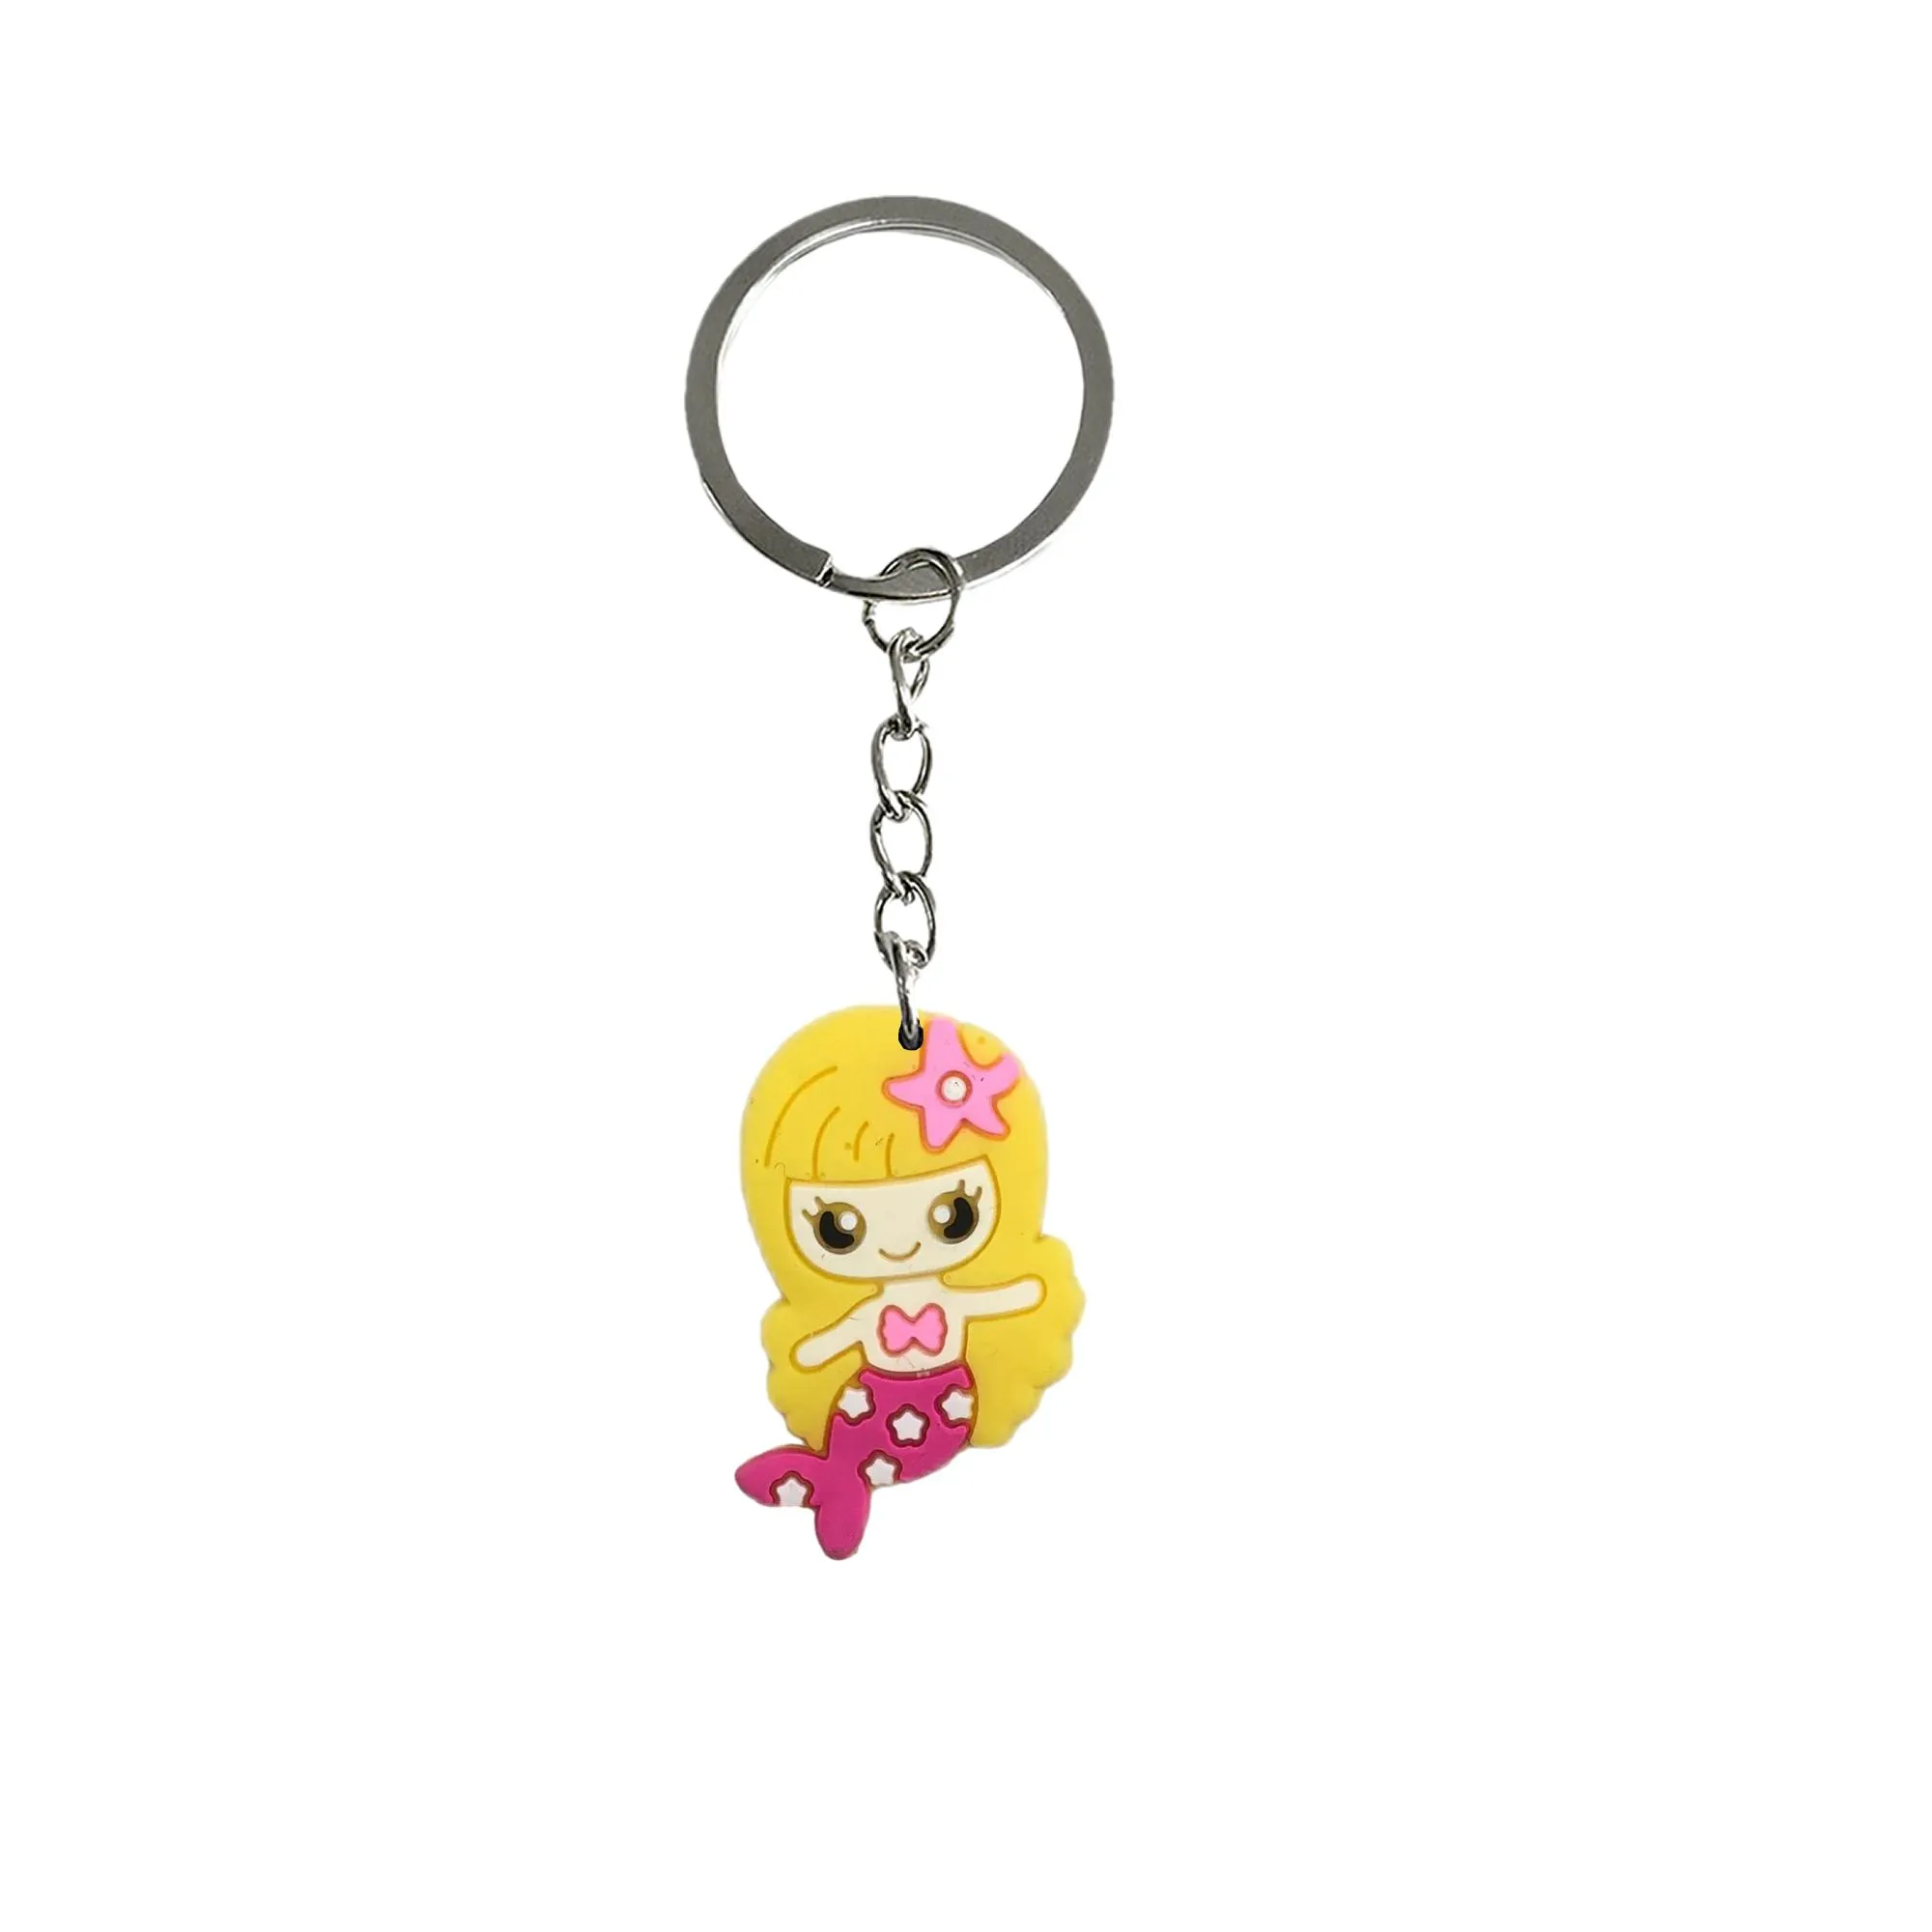 mermaid 21 keychain for tags goodie bag stuffer christmas gifts keychains school day birthday party supplies gift keyrings bags keyring suitable schoolbag backpack key purse handbag charms women girls